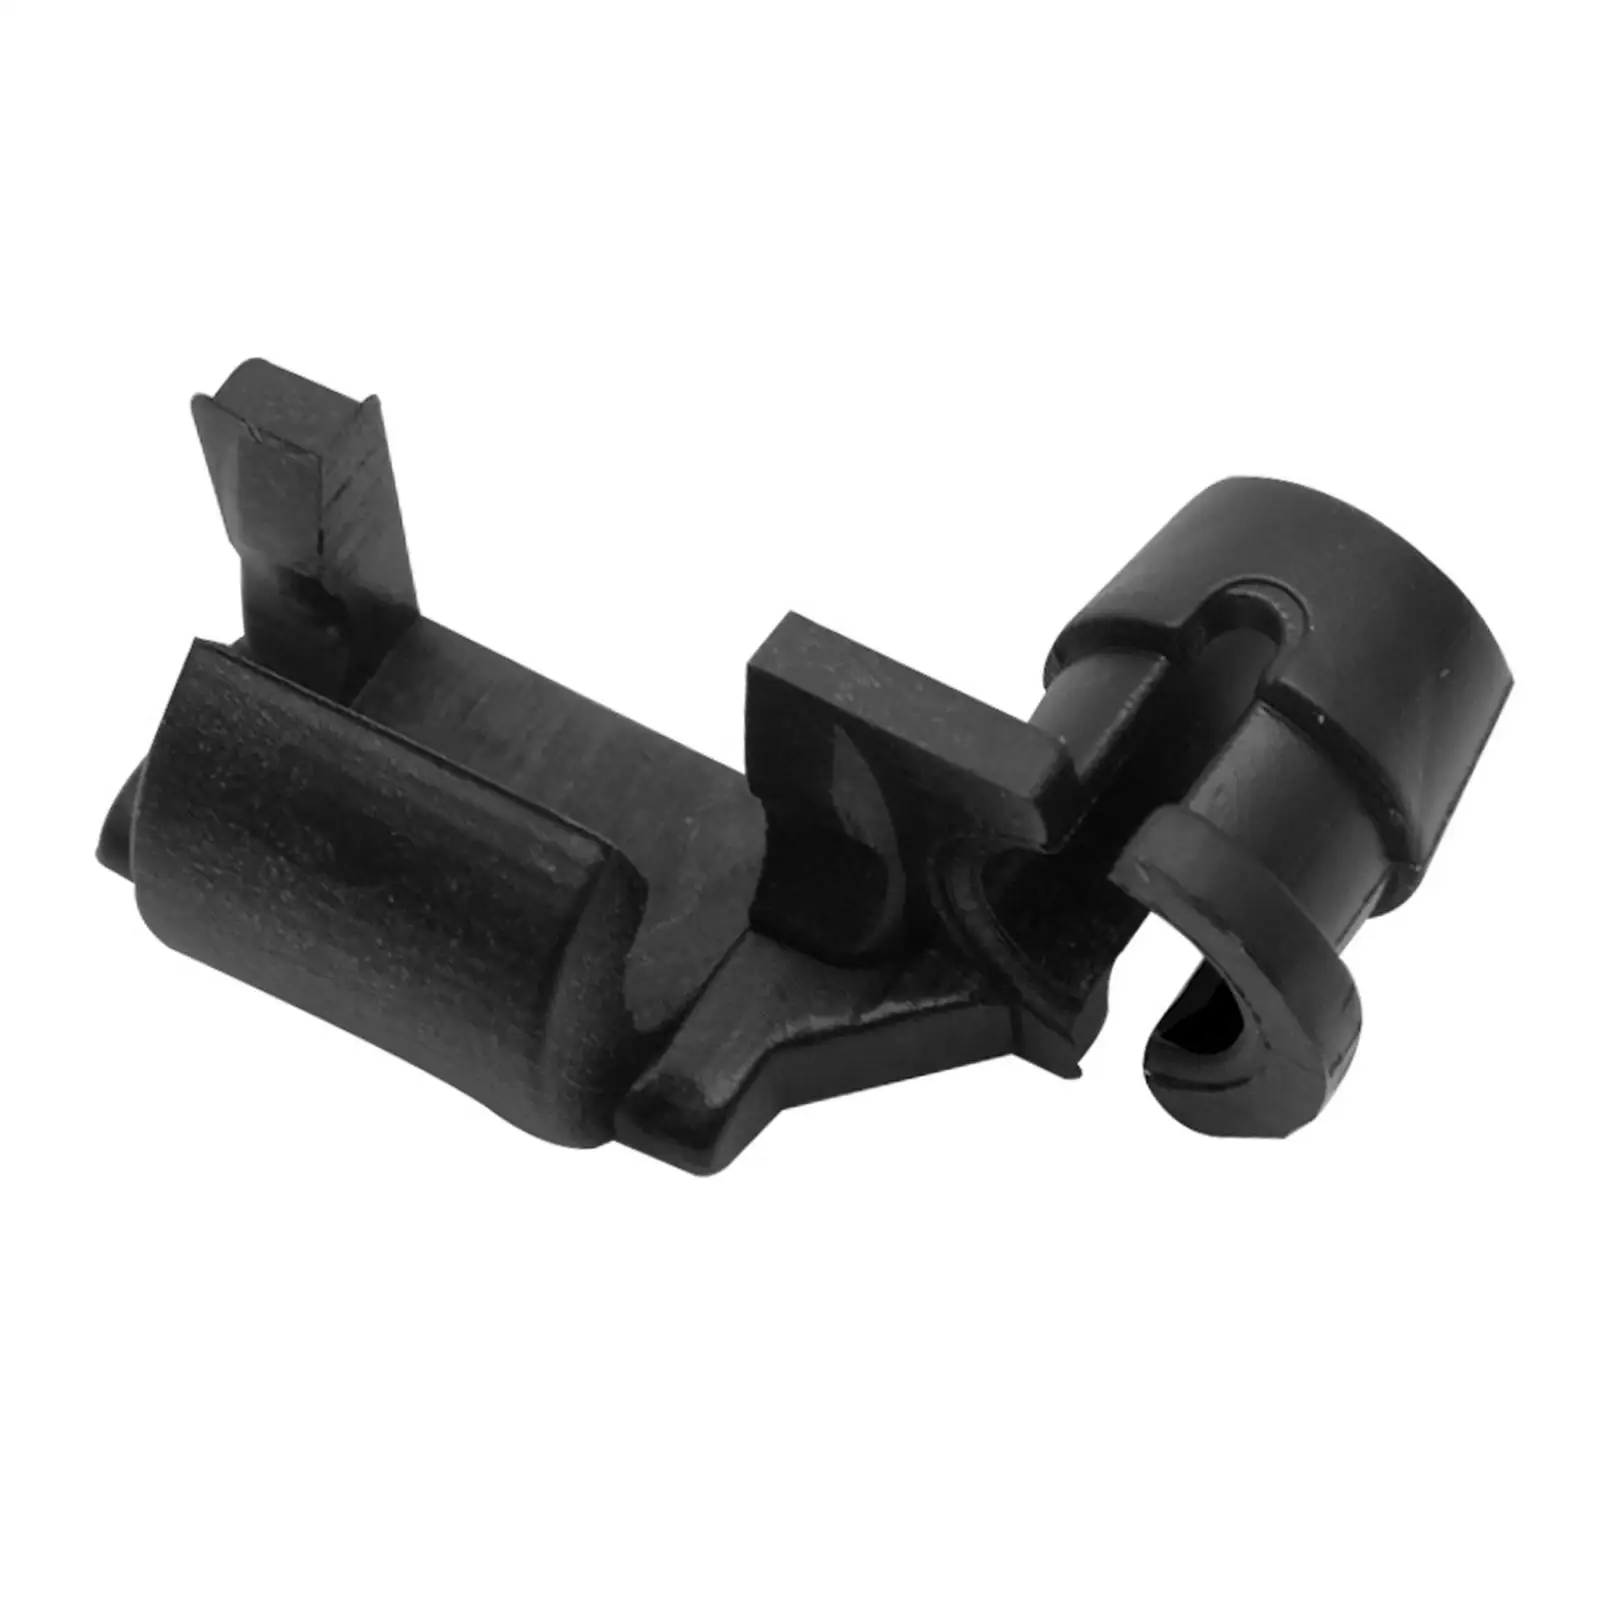 Joint Link 6R5-41237-00-00 for Yamaha Outboard Motor Easily Install Durable Stable Performance Direct Replacement